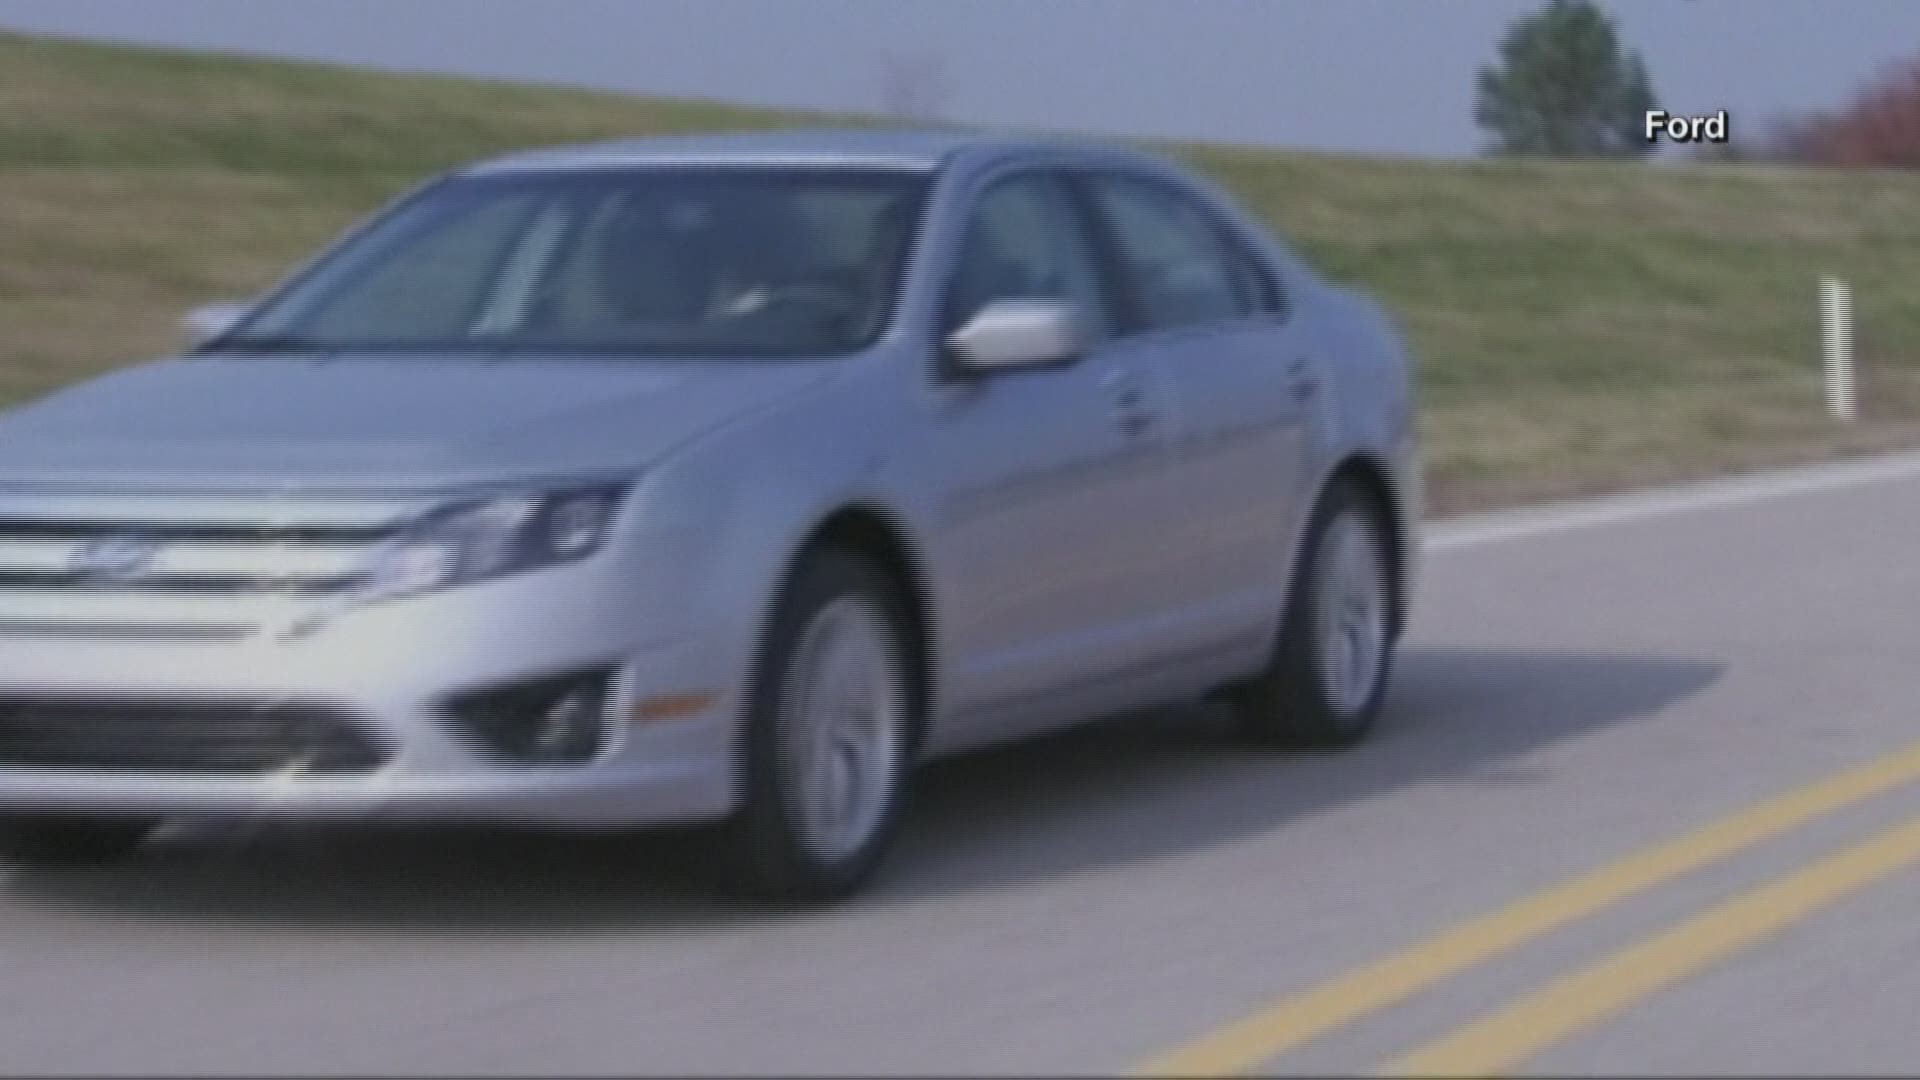 Ford is recalling more than 600,000 midsize sedans in the U.S. to fix a problem with the brakes that can increase stopping distance and possibly cause a crash.